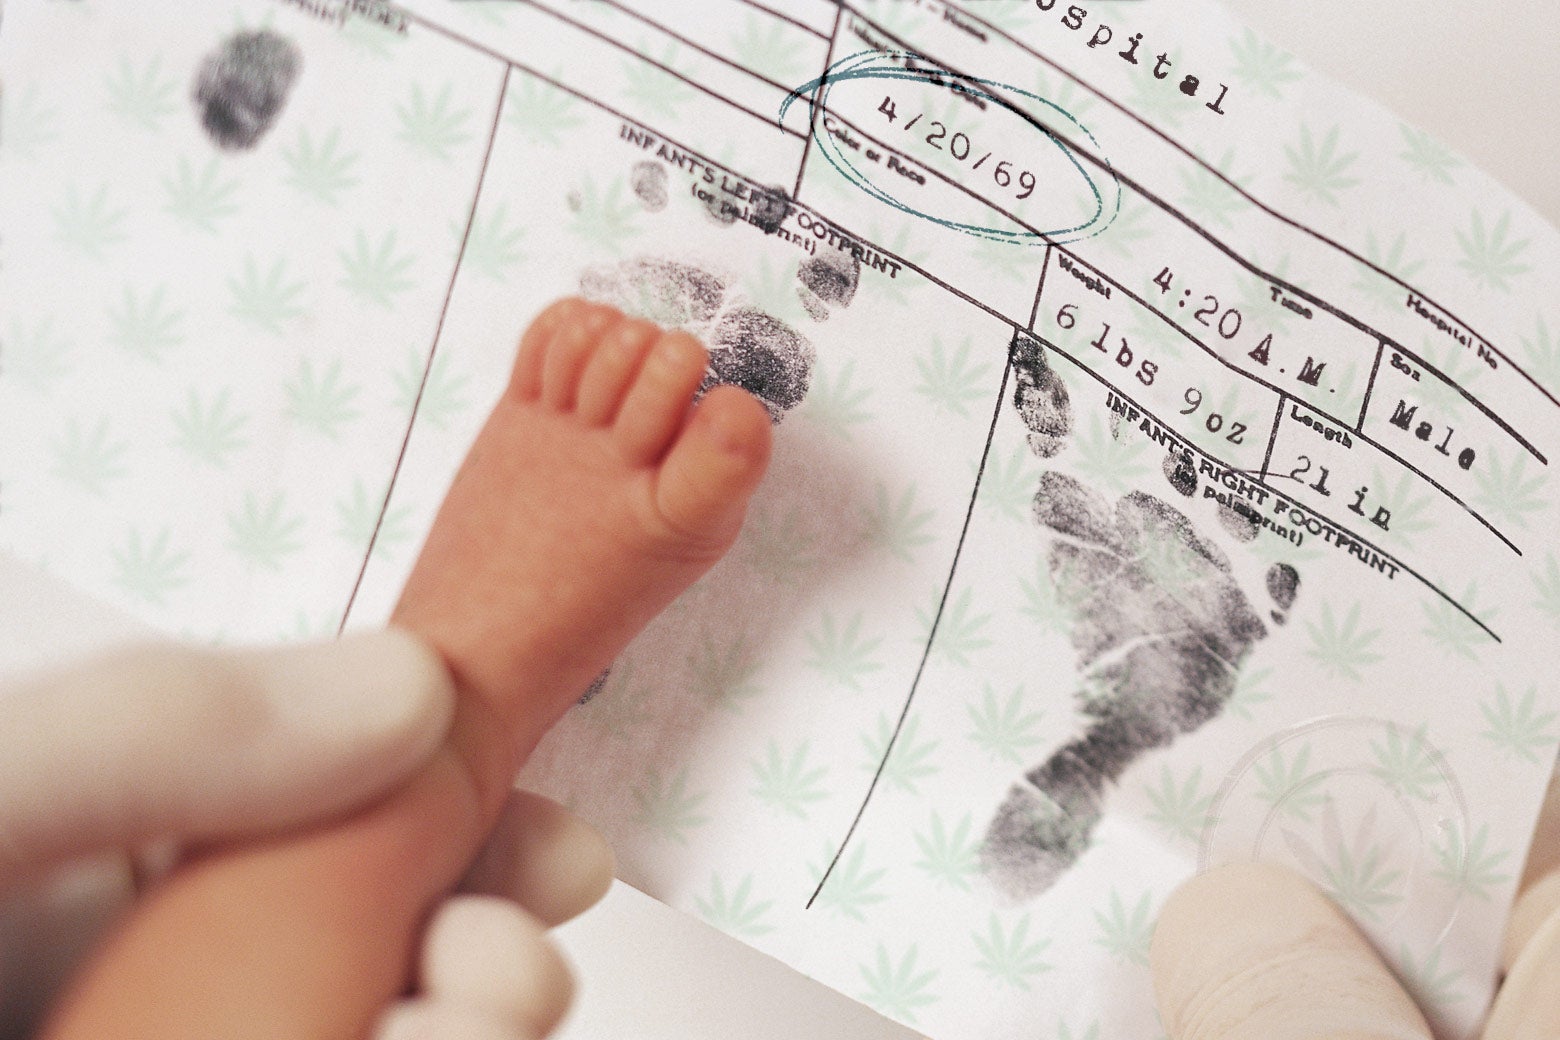 A baby's foot being stamped on a birth certificate dated 4/20/69.